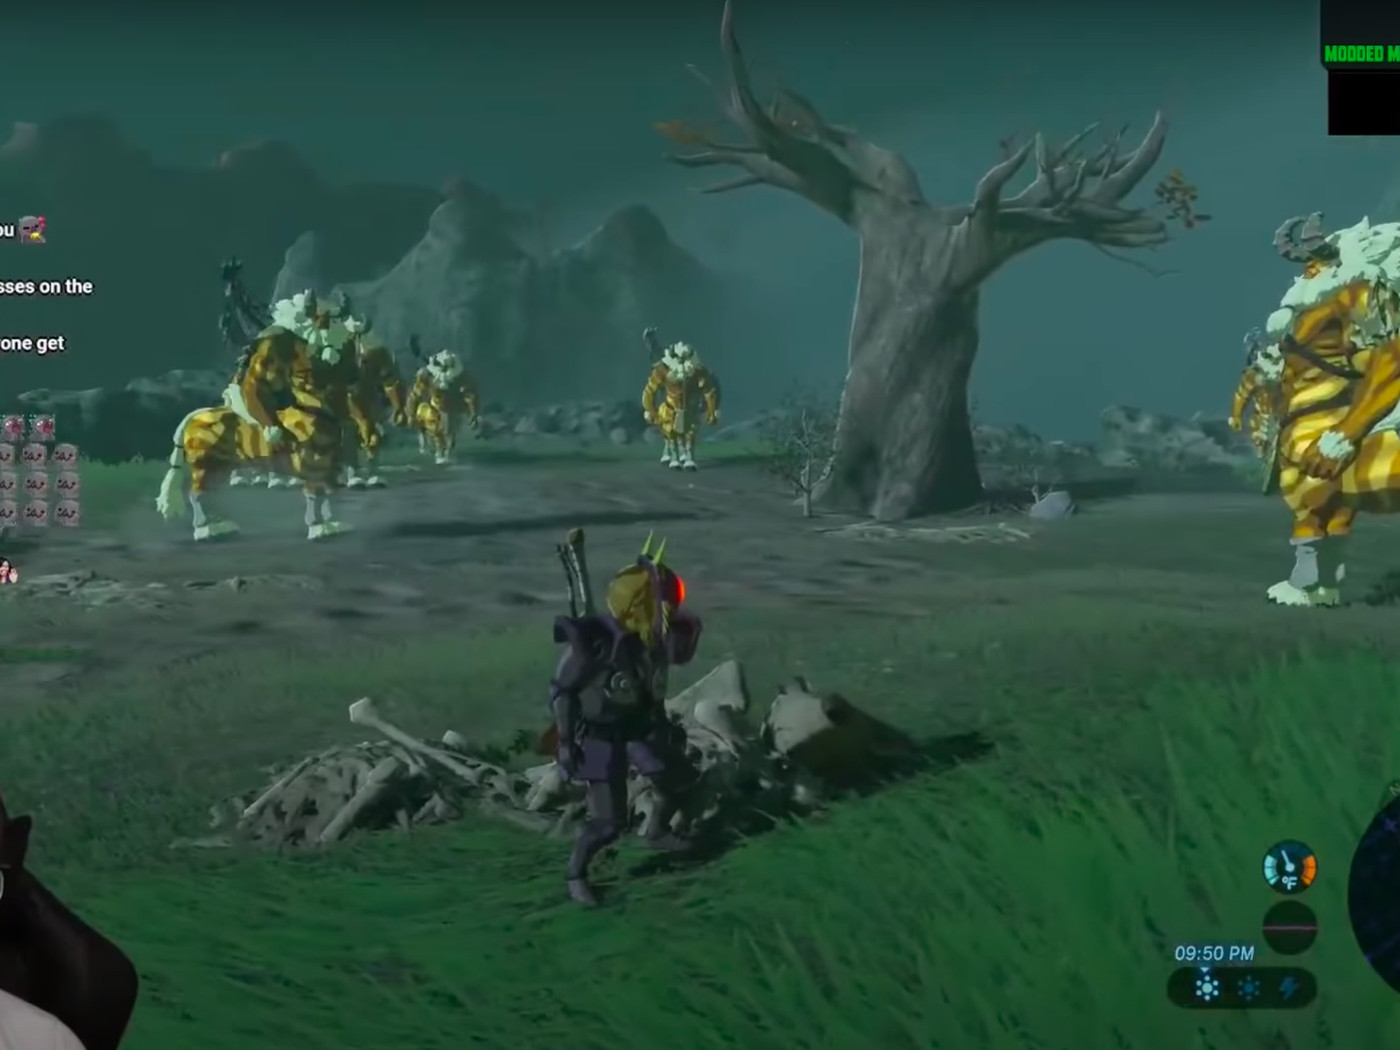 Breath Of The Wild Modded So Every Single Enemy Is A Golden Lynel